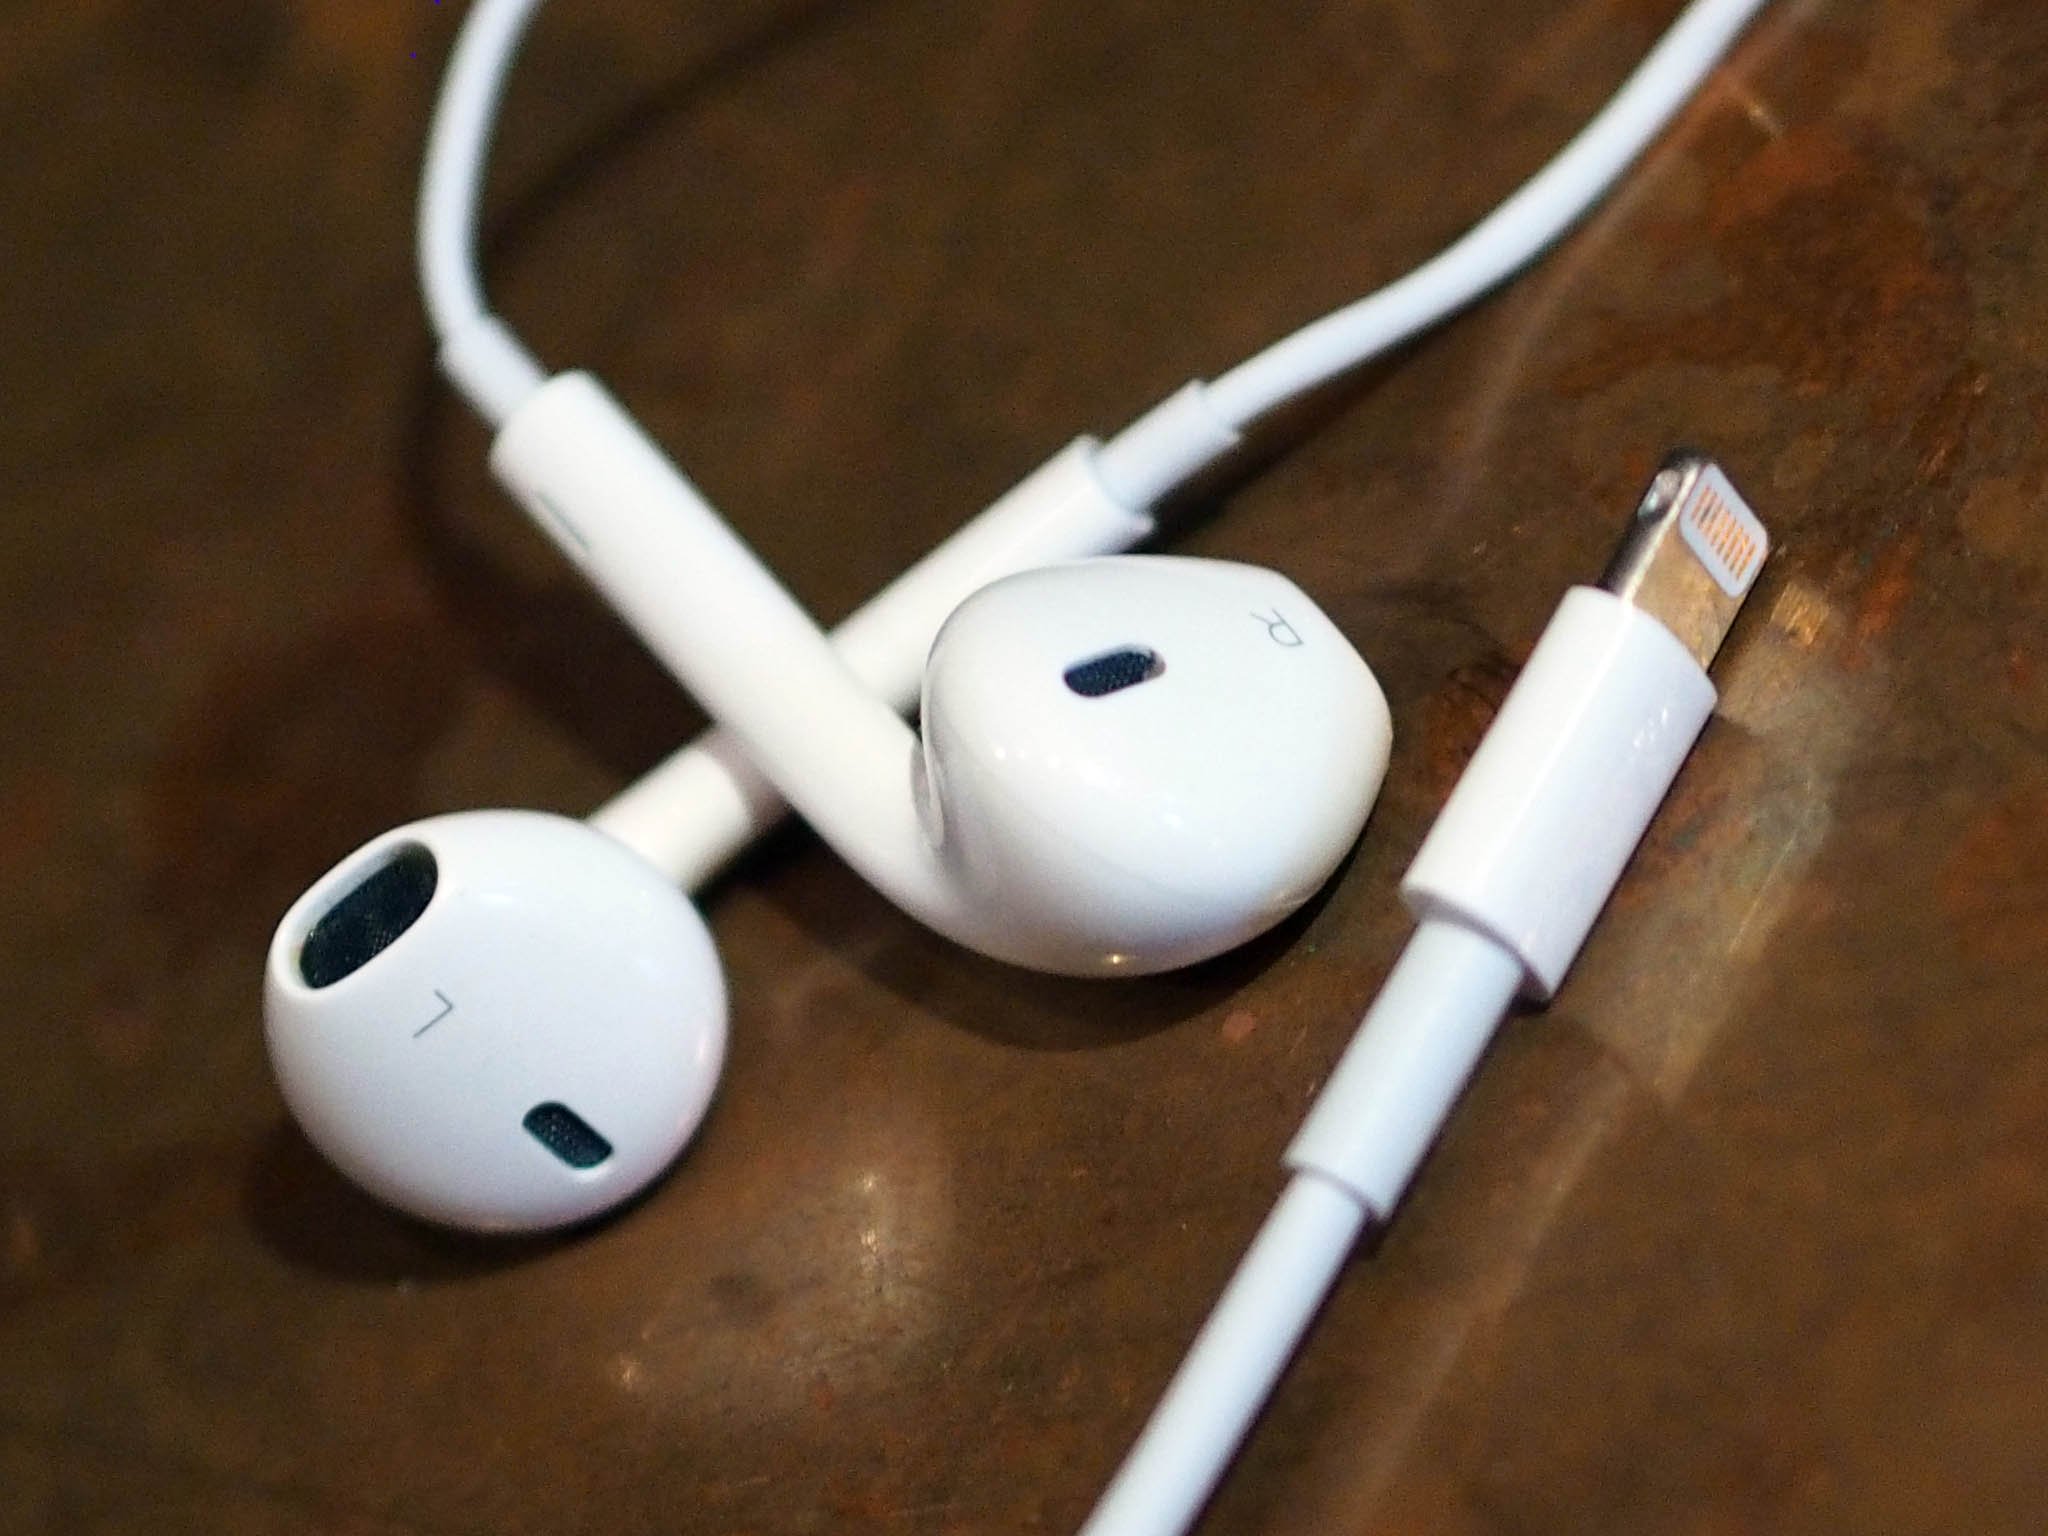 Free EarPods with an iPhone are an environmental waste - 9to5Mac